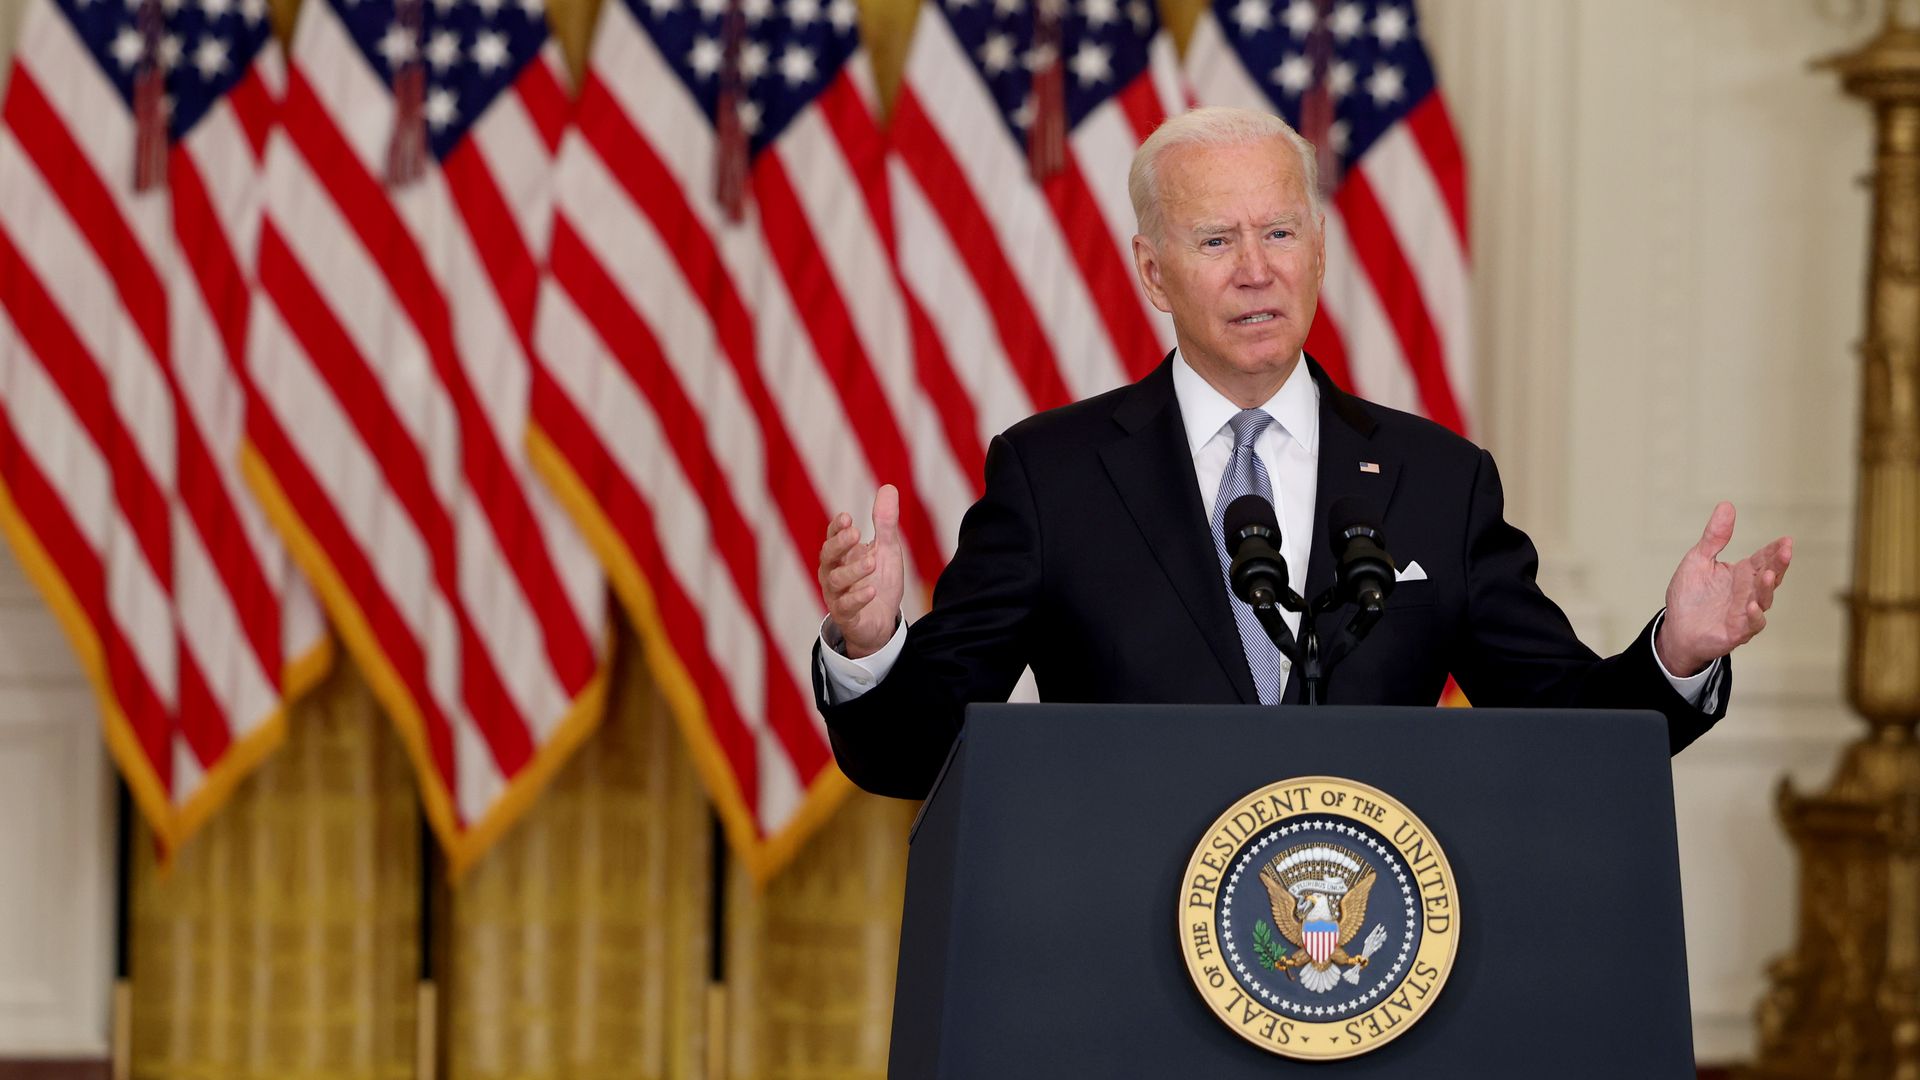 President Joe Biden stands in front of a row of American flags and gestures at a podium with an insignia reading President of the United States